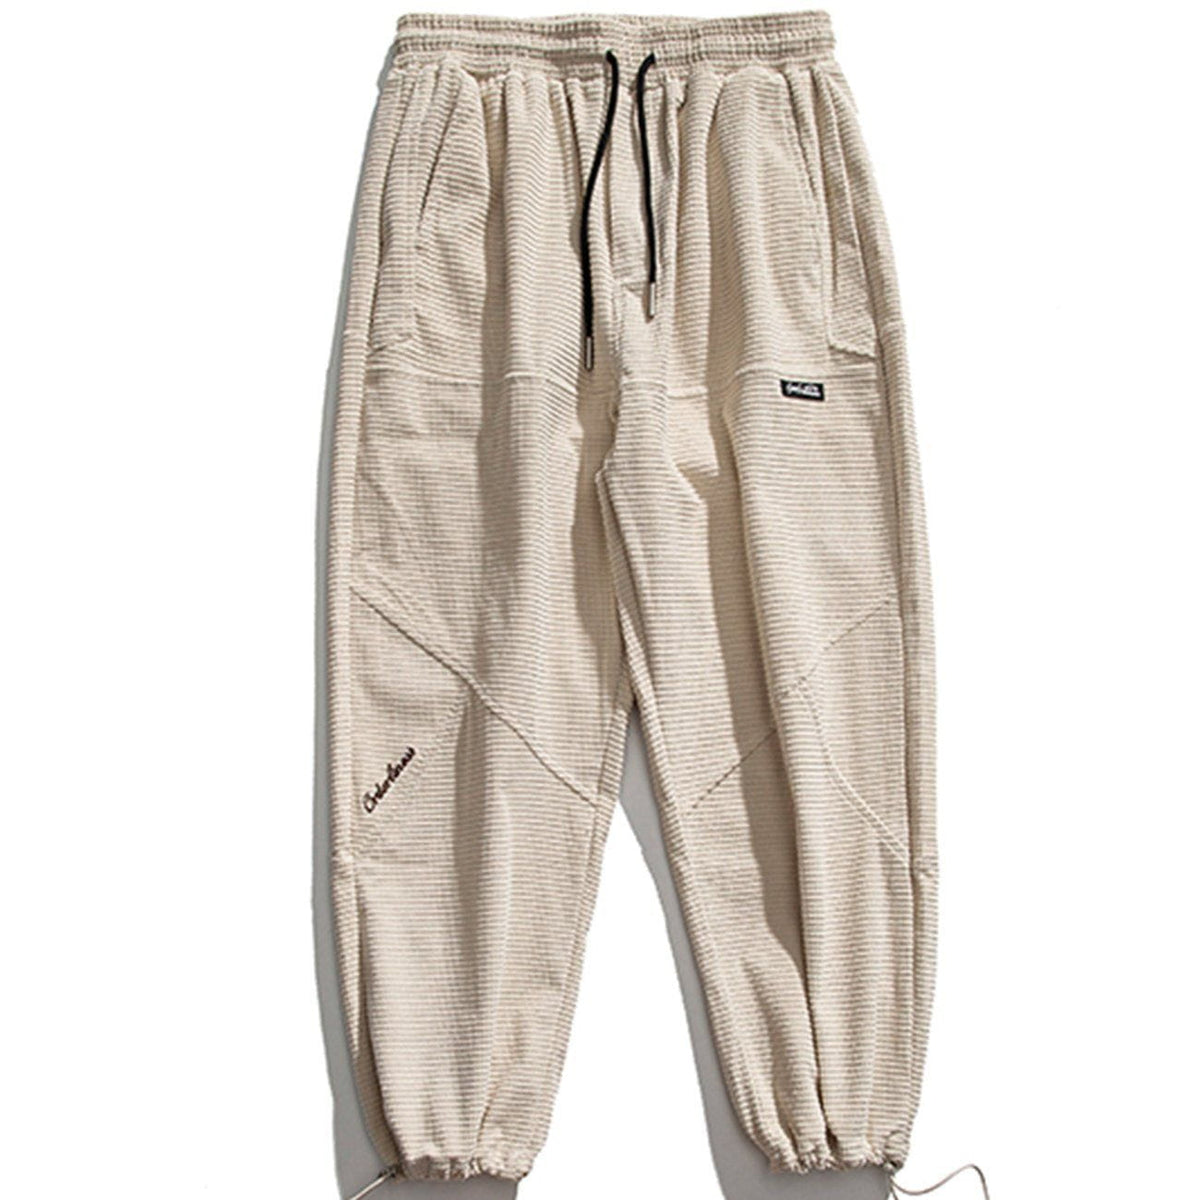 Check styling ideas for「Sweat Pants」